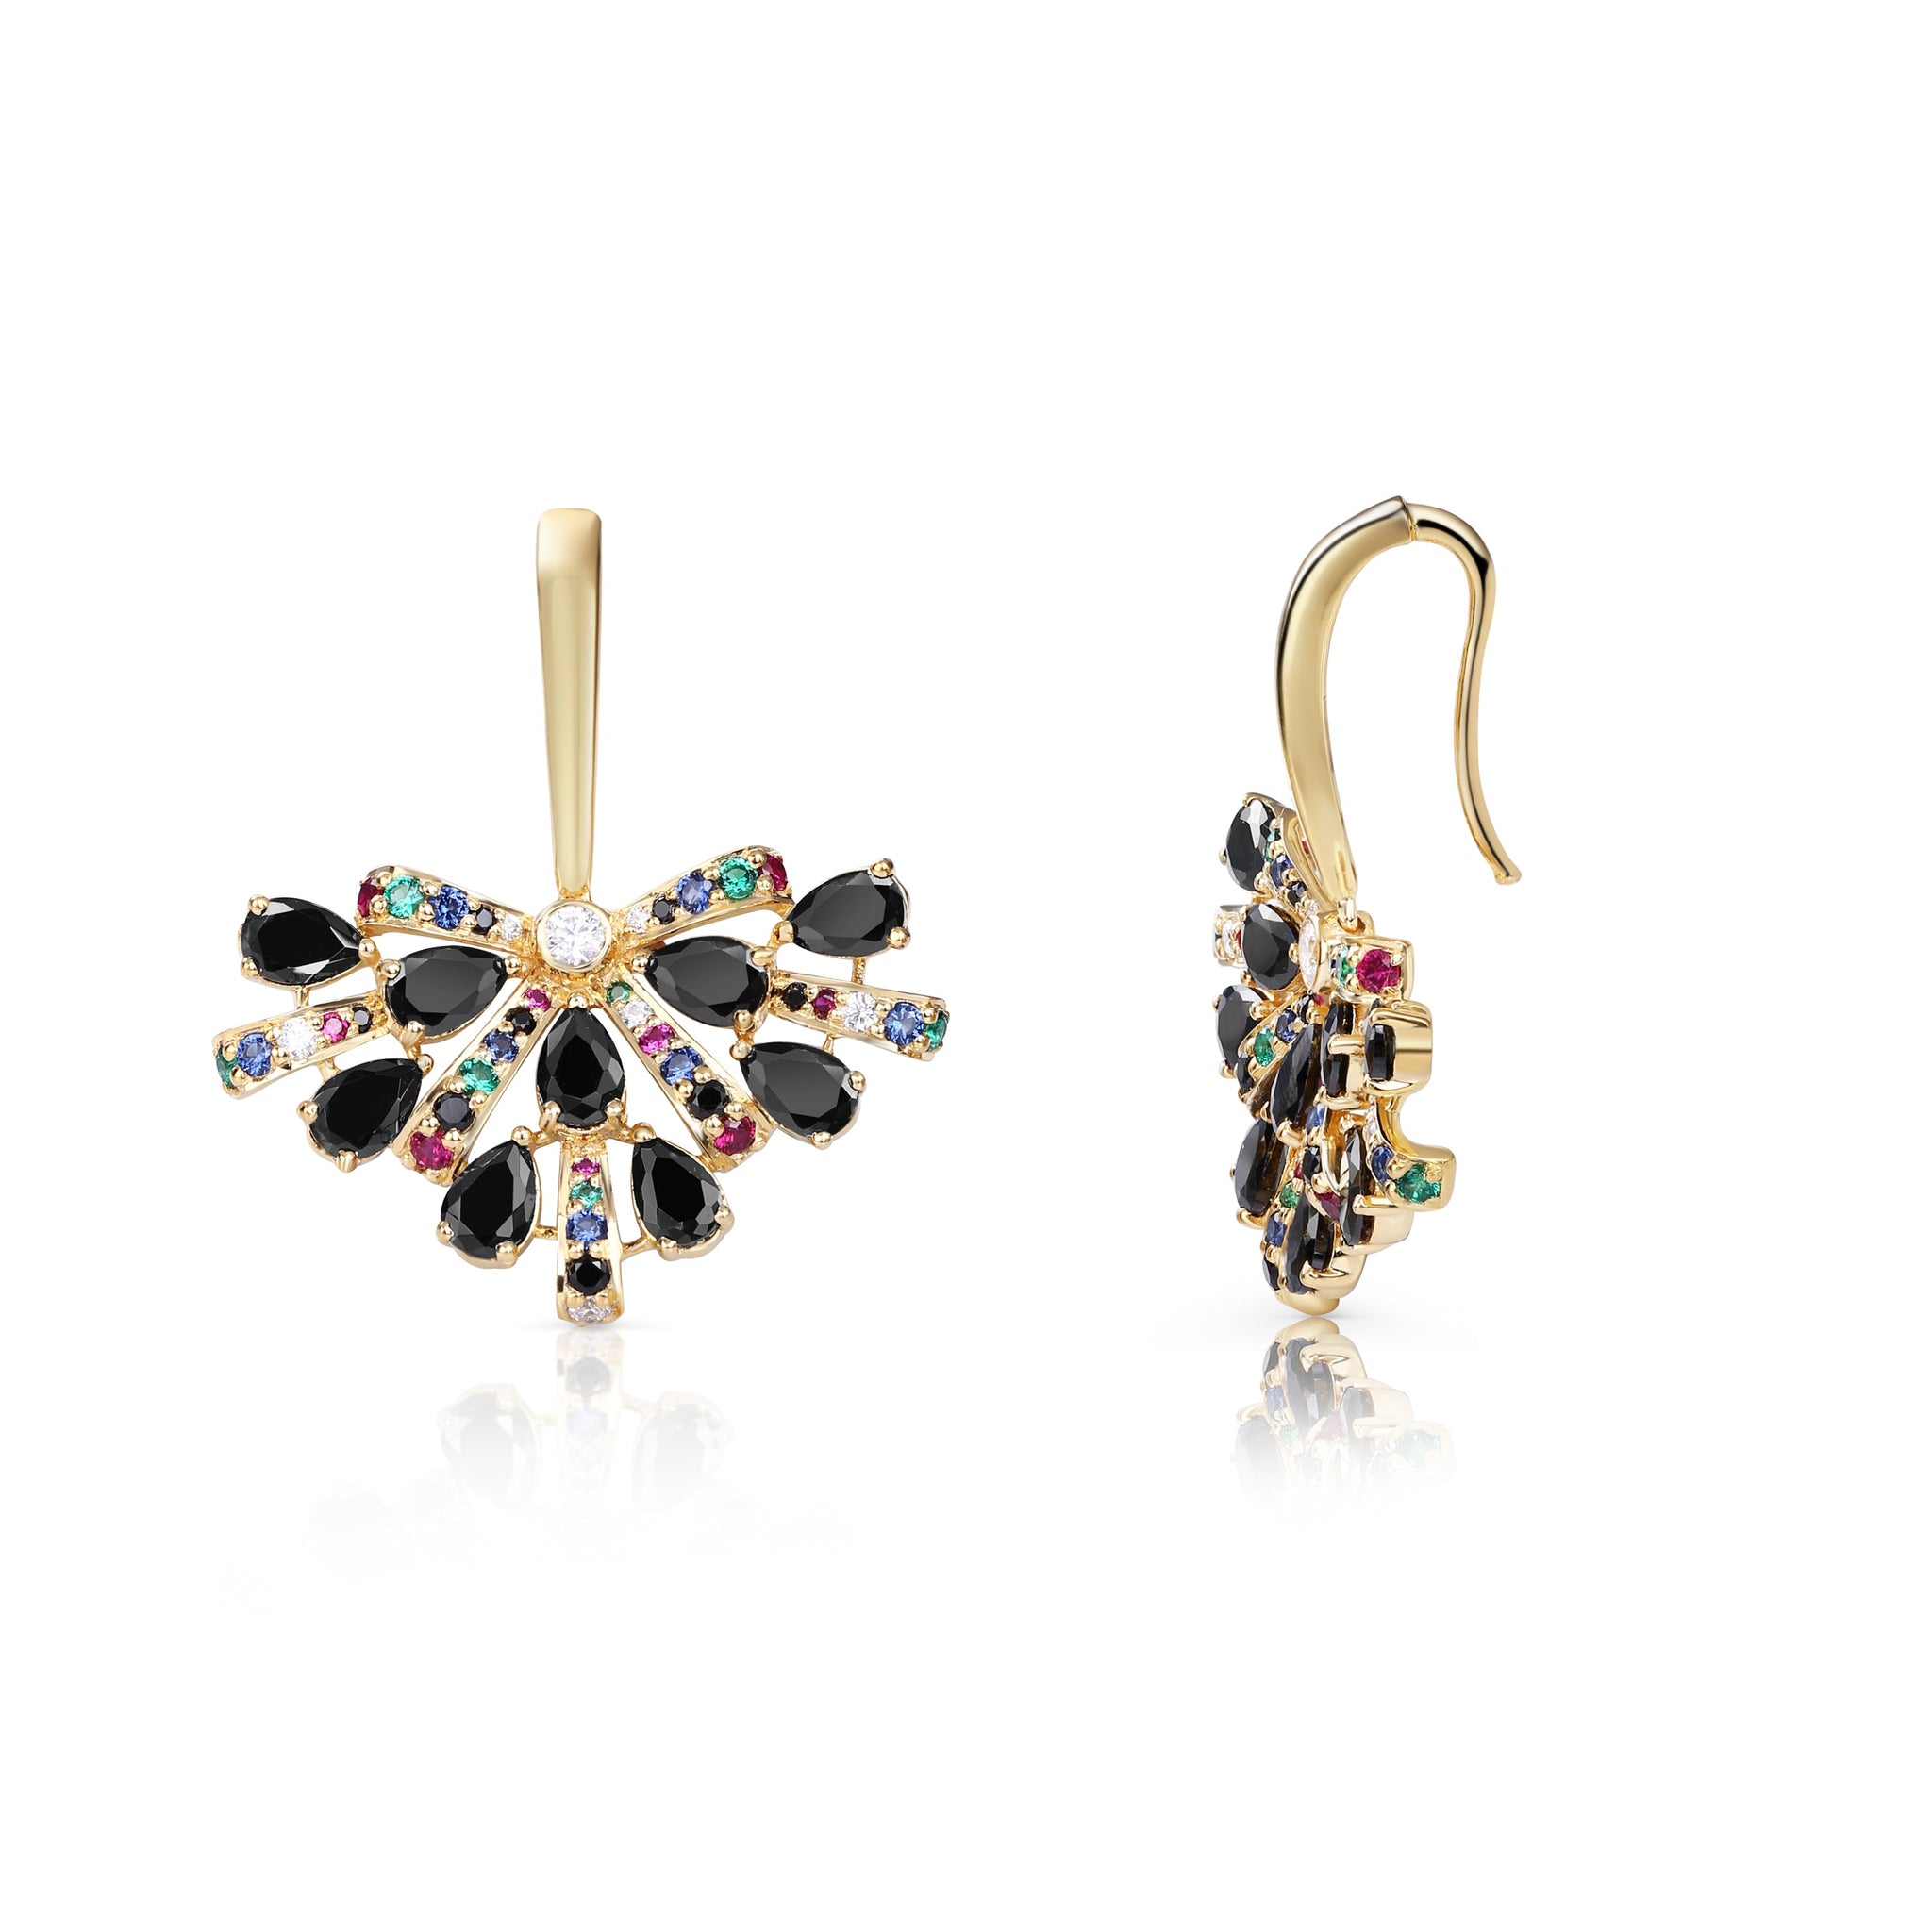 Exquisite Uptown Earrings - Black and Gold